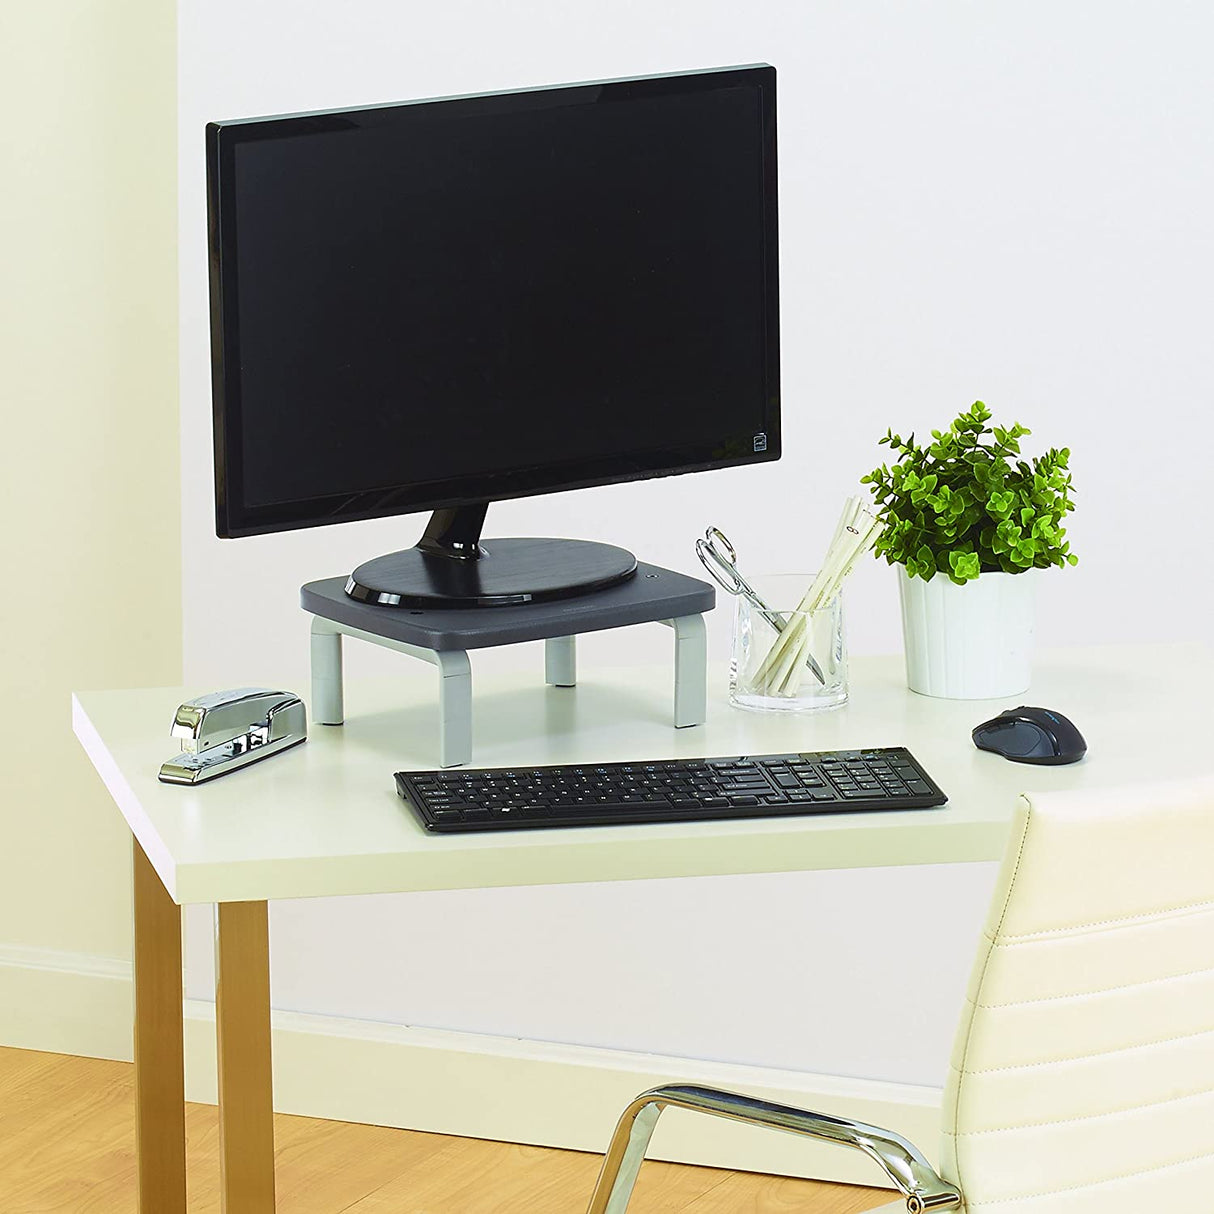 Kensington SmartFit Monitor Stand for up to 21” screens - Gray (K60087F)